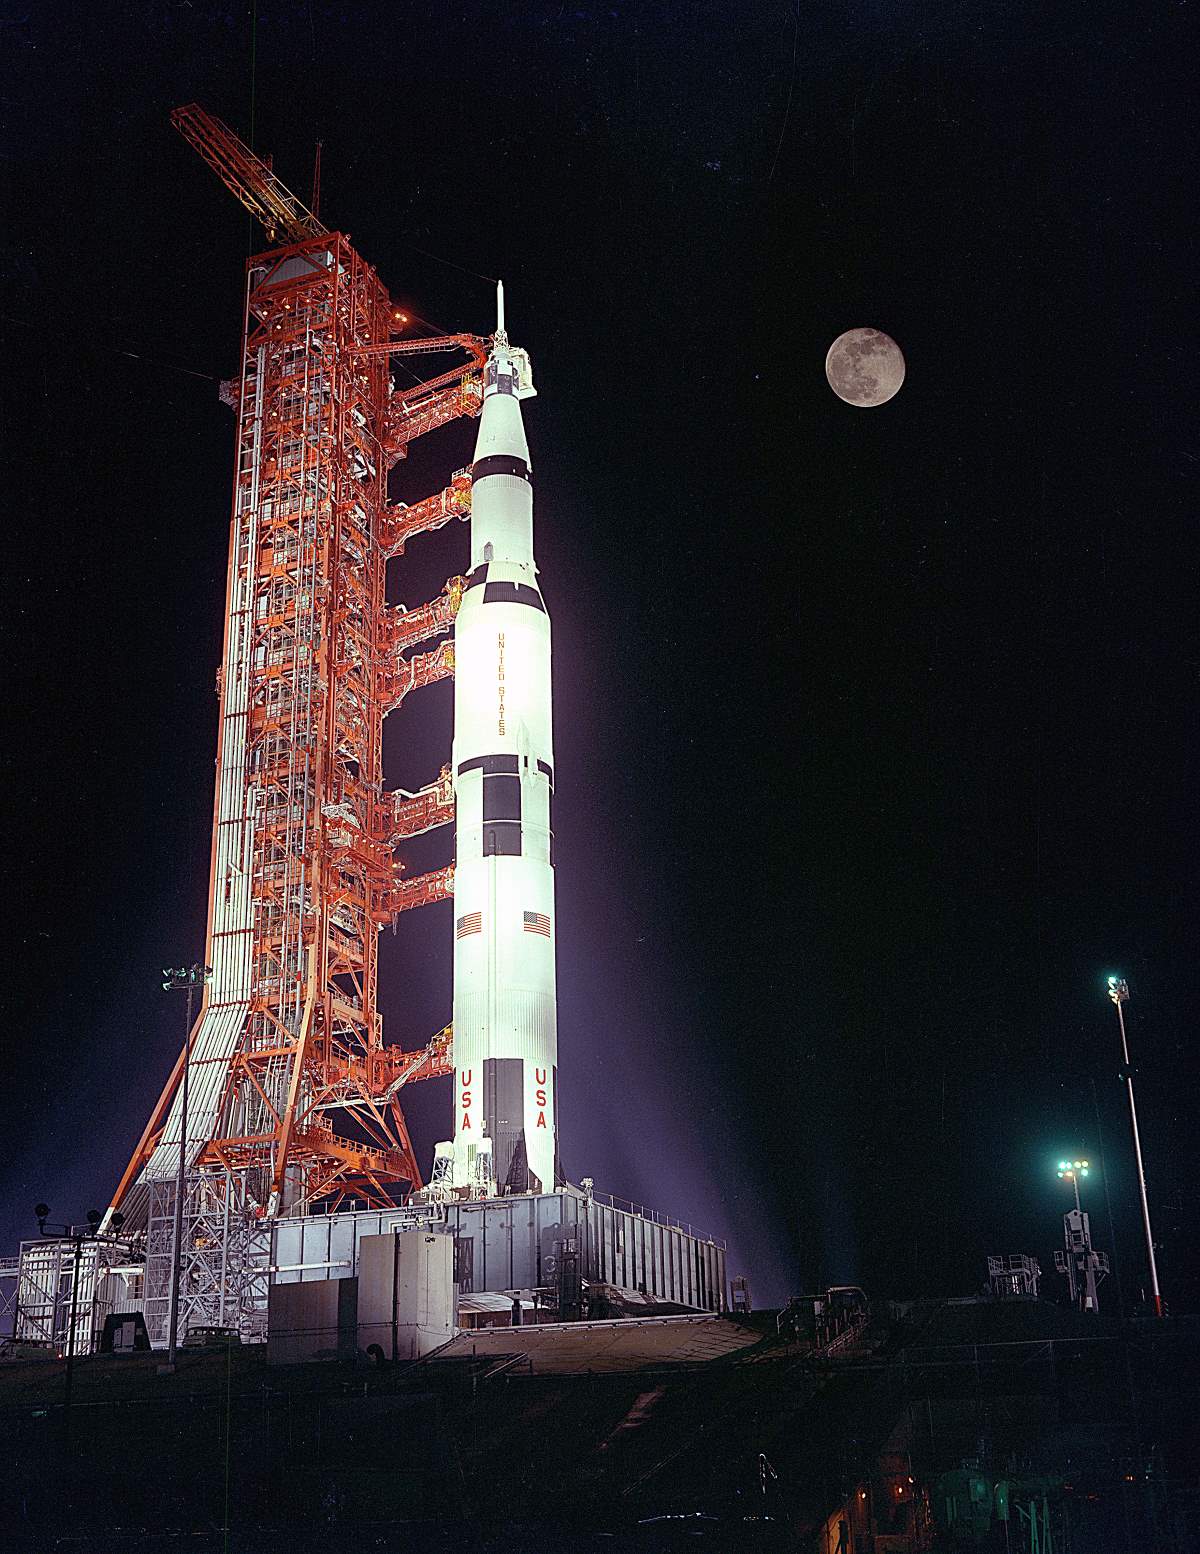 Apollo 17 during the prelaunch, with the Moon is in the background